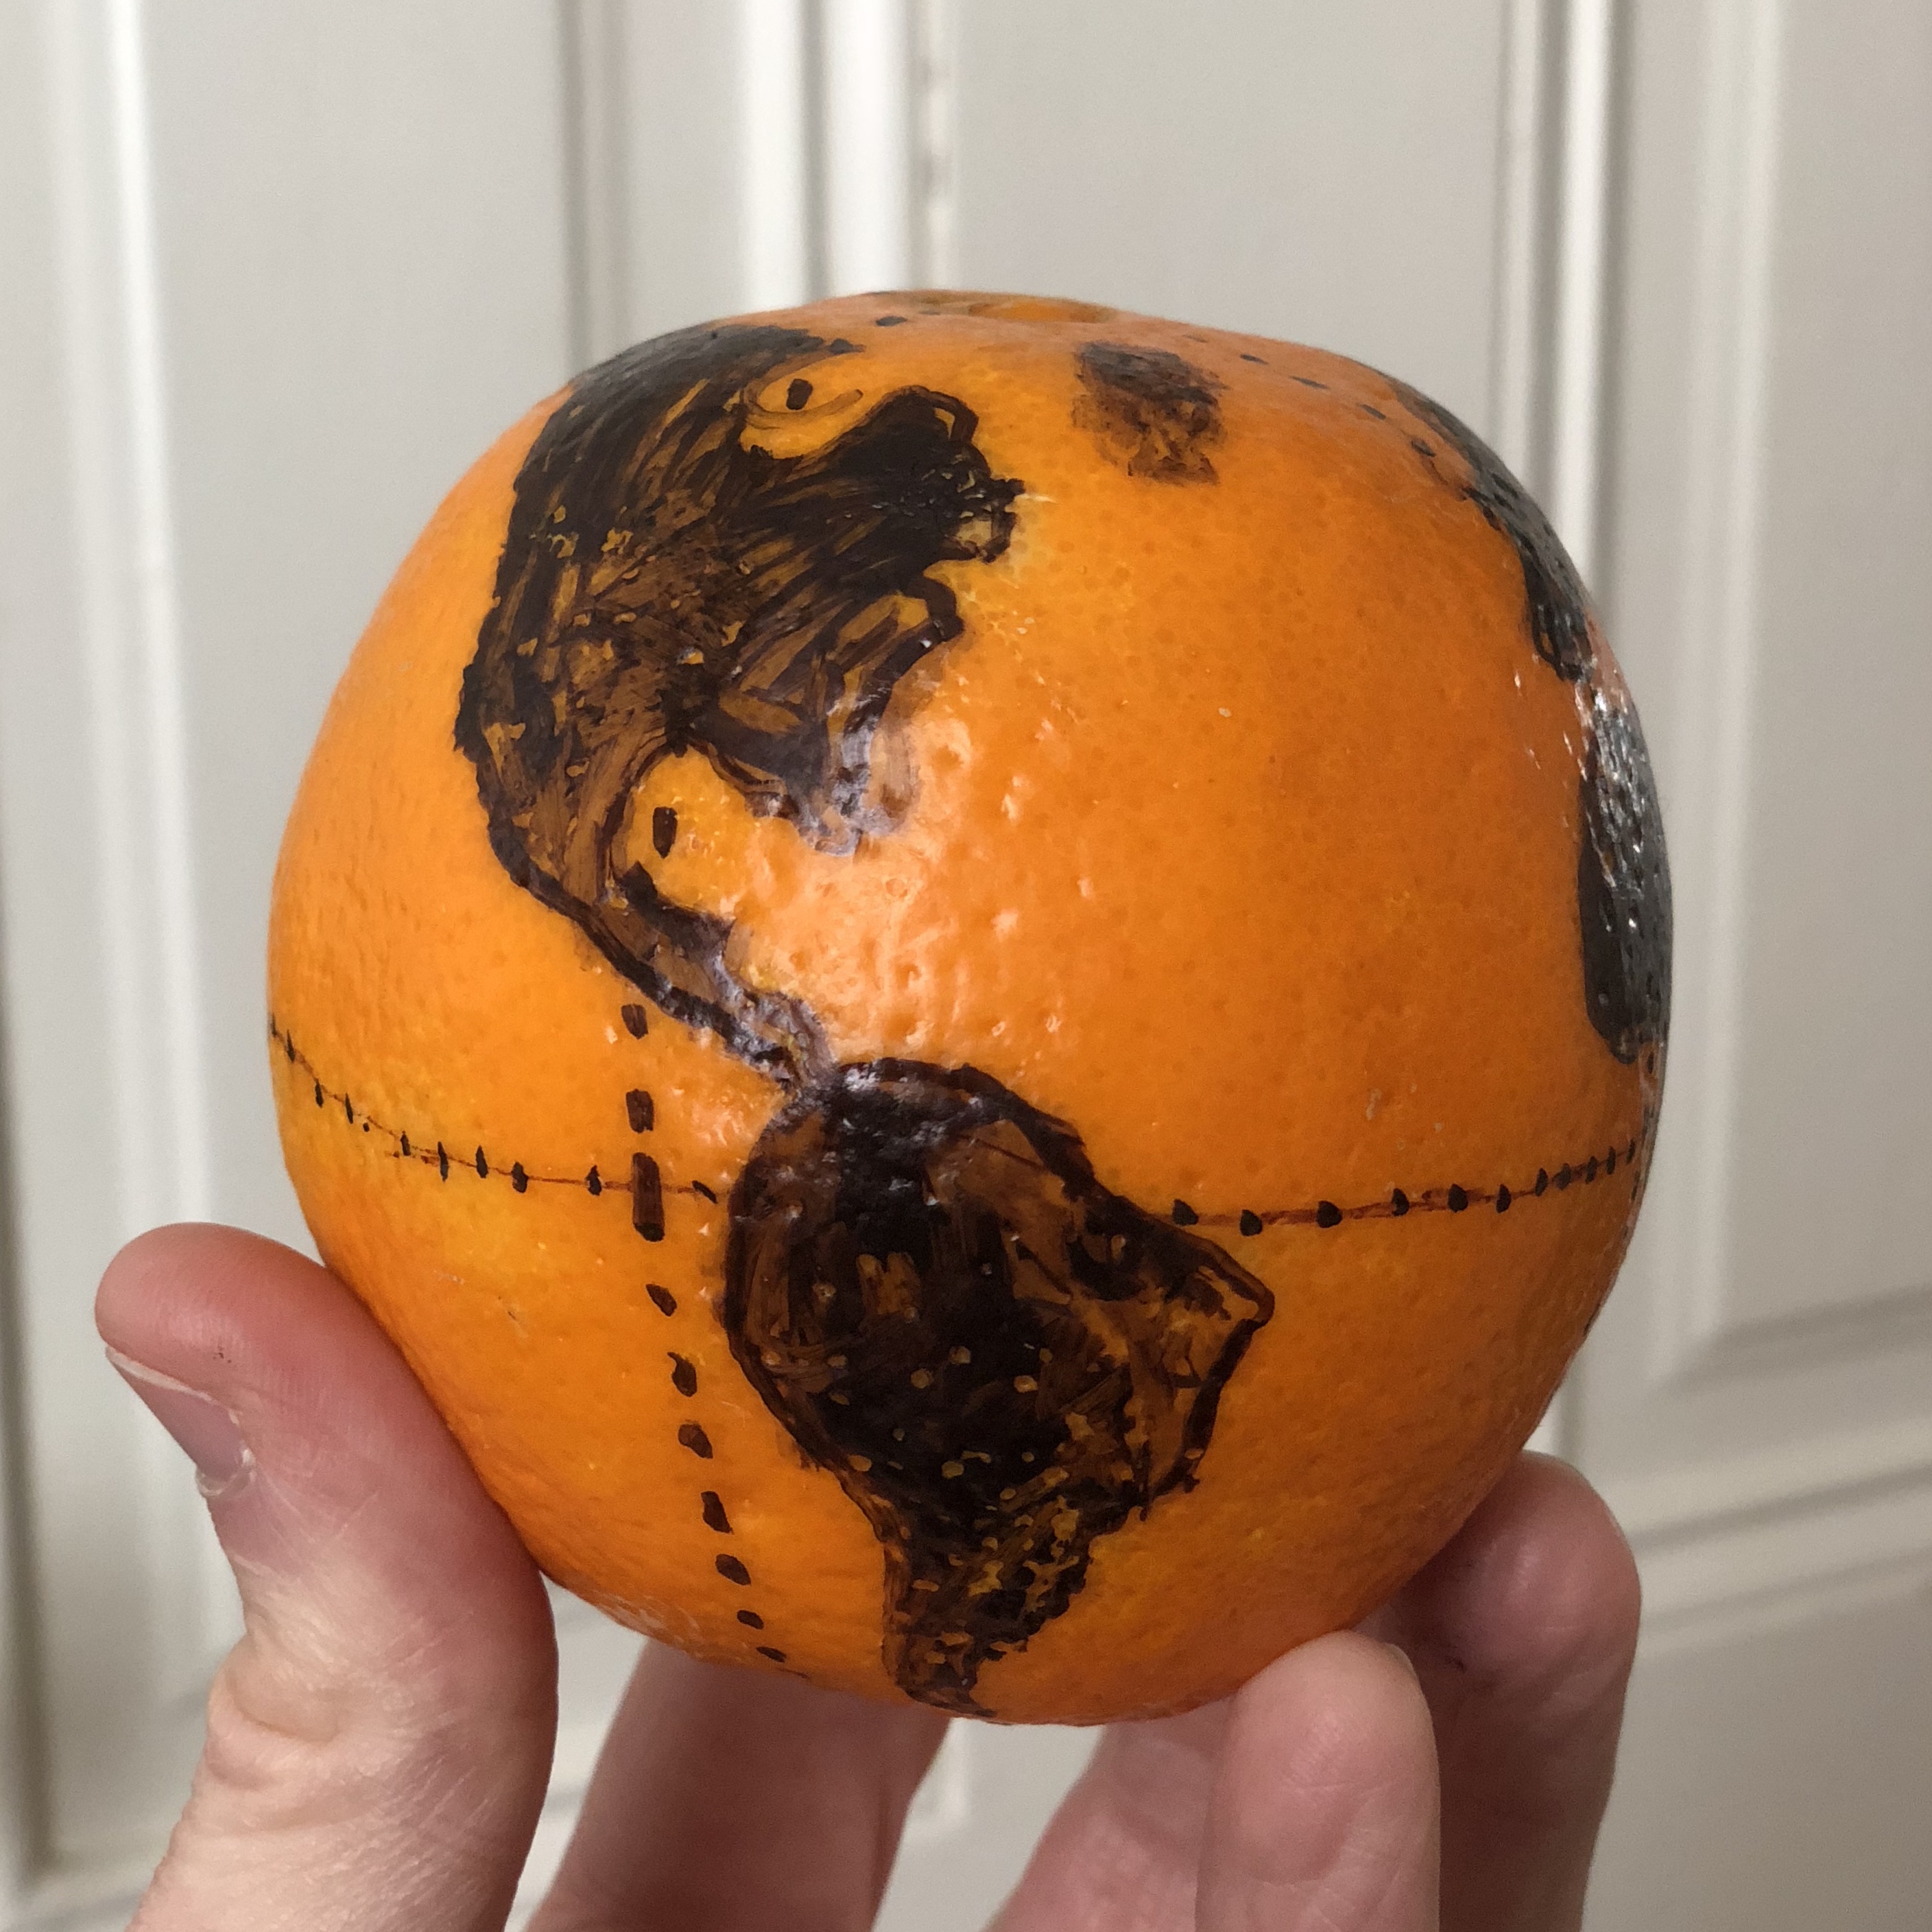 A globe drawn out on to an orange (RJ Andrews/@InfoWeTrust)